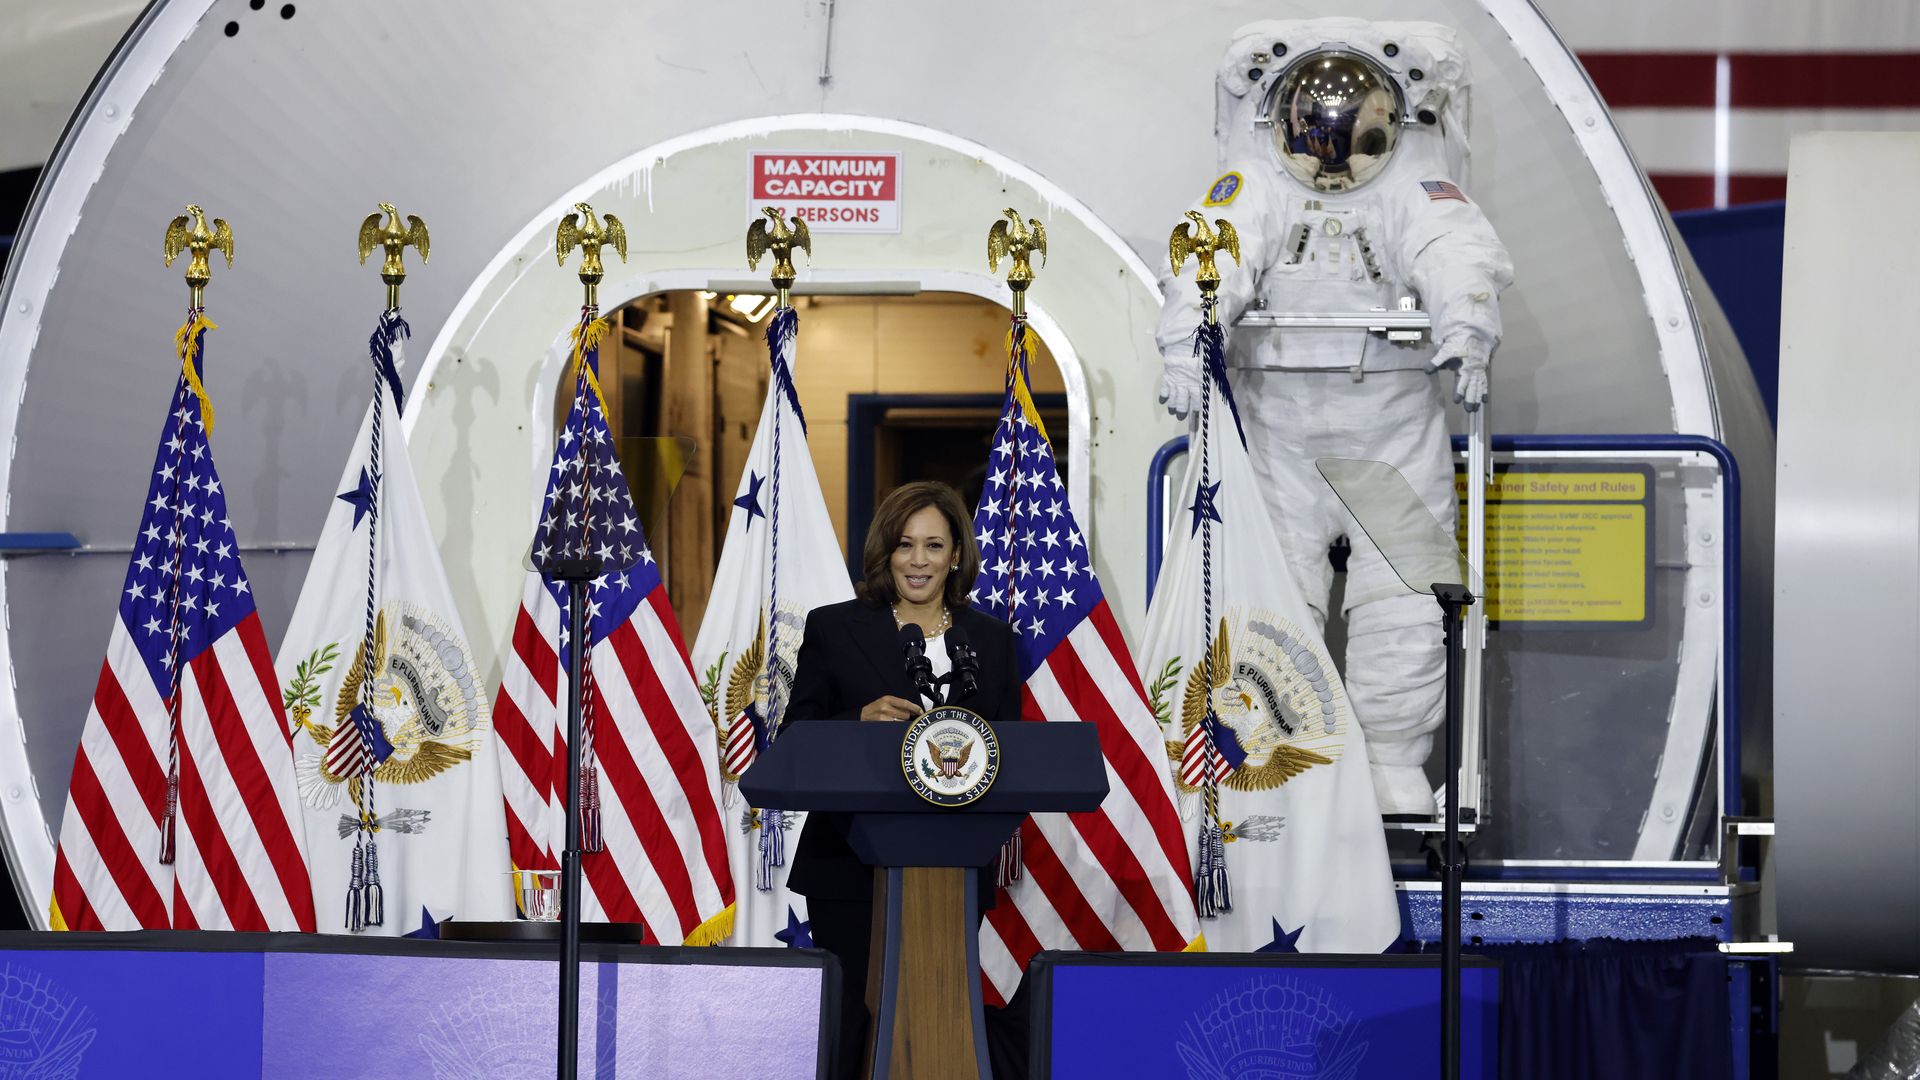 Photo of Kamala Harris in front of a large astronaut statue and American flags. 